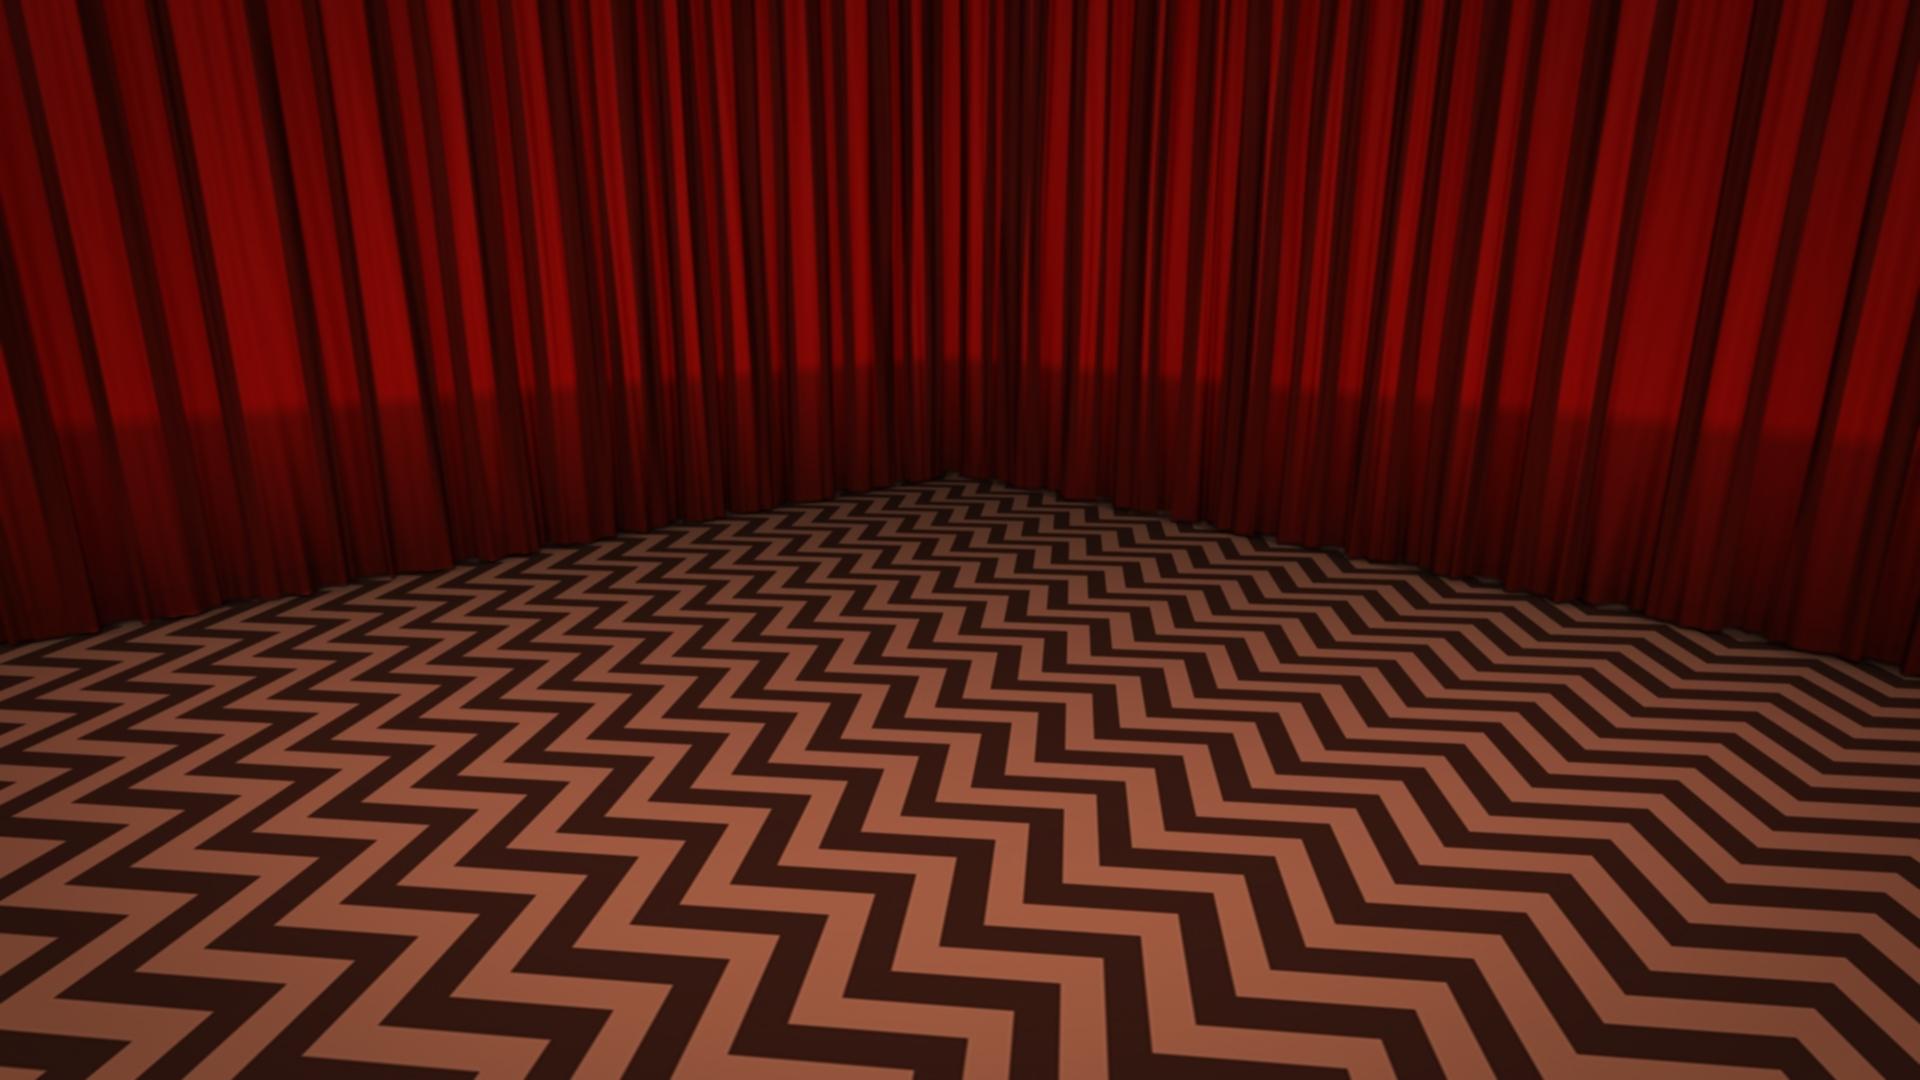 1920 x 1080 · jpeg - 10 Top Twin Peaks Red Room Wallpaper FULL HD 19201080 For PC ...